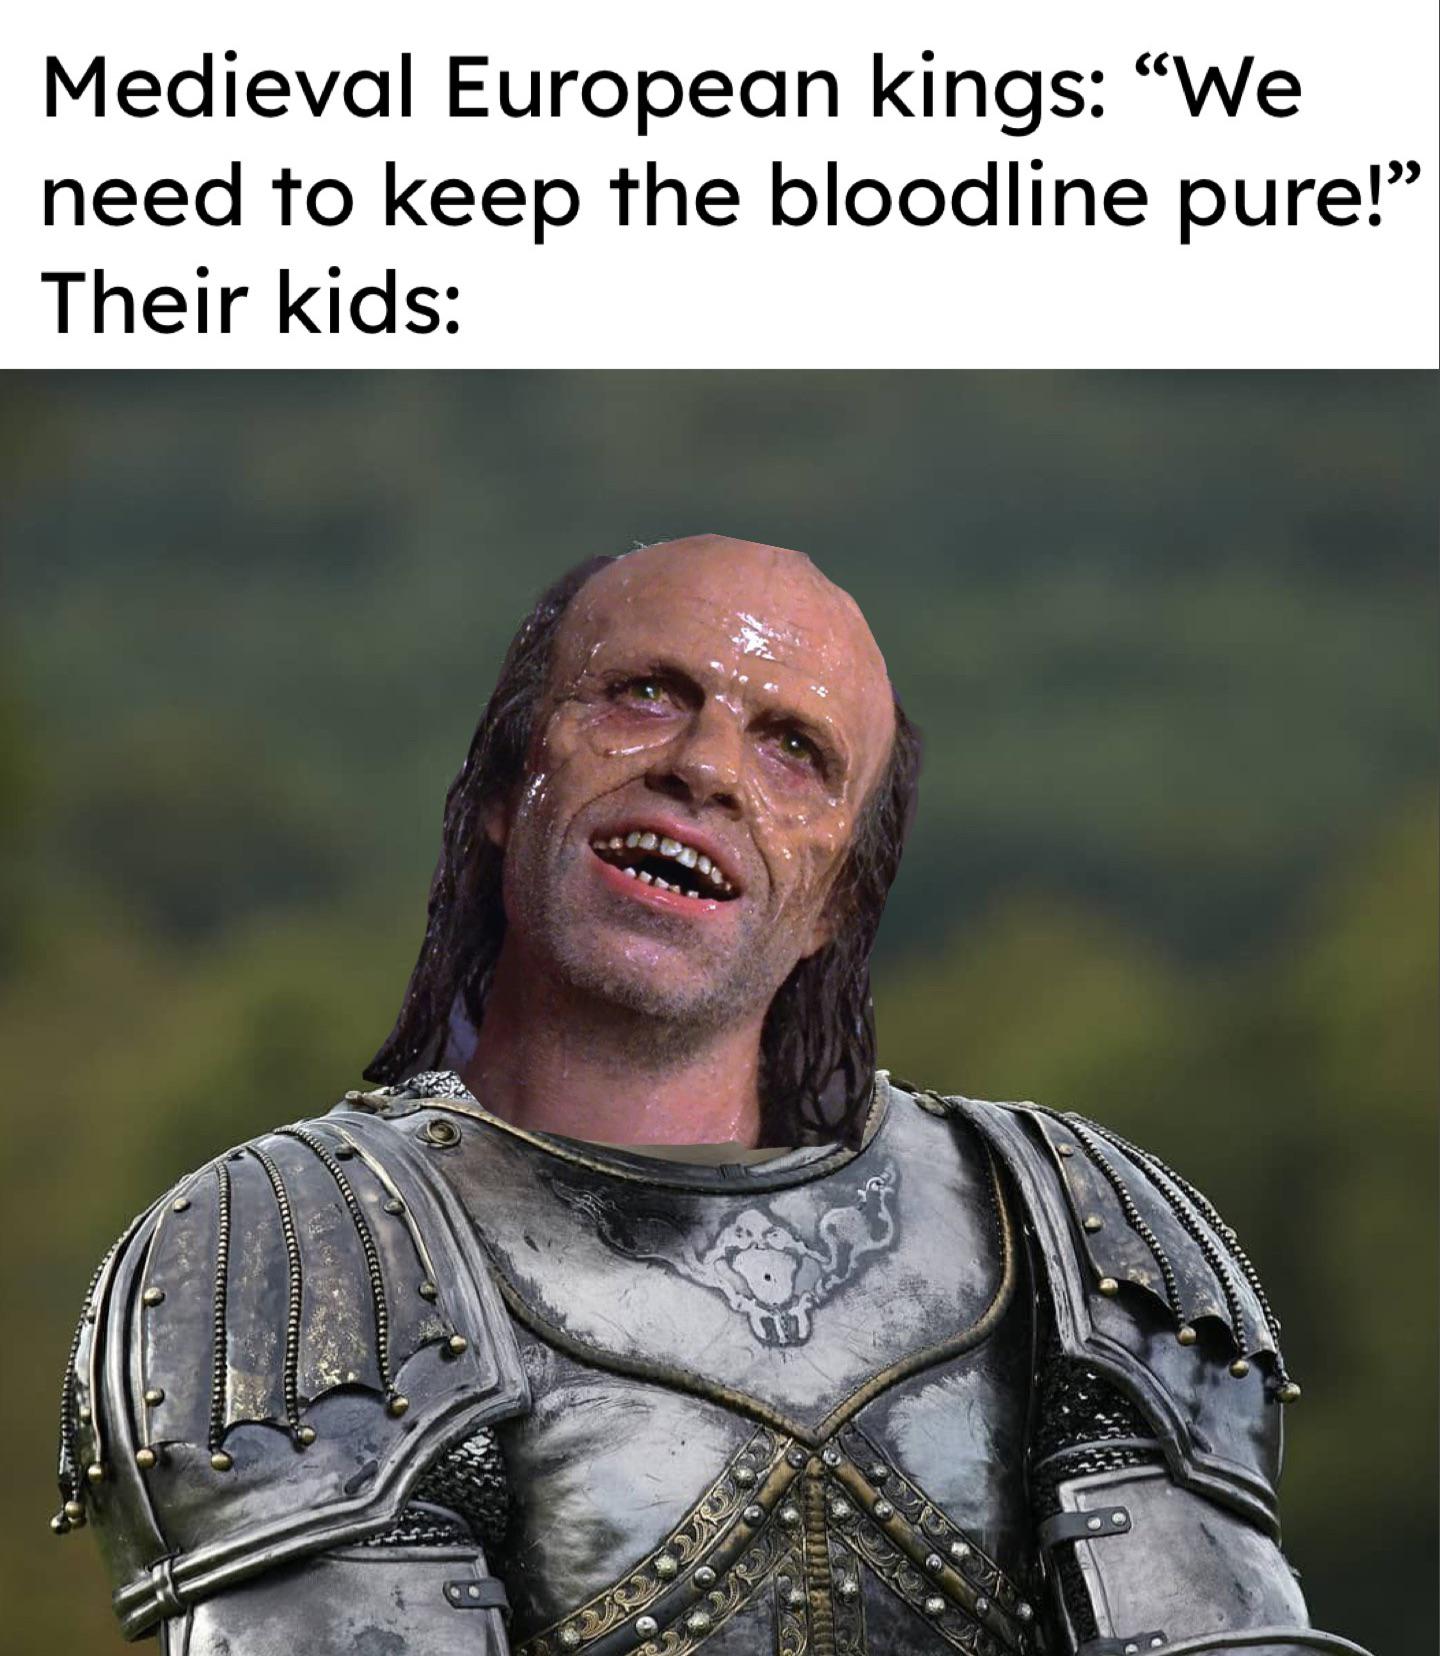 funny memes - henry cavill the tudors season - Medieval European kings "We need to keep the bloodline pure!" Their kids